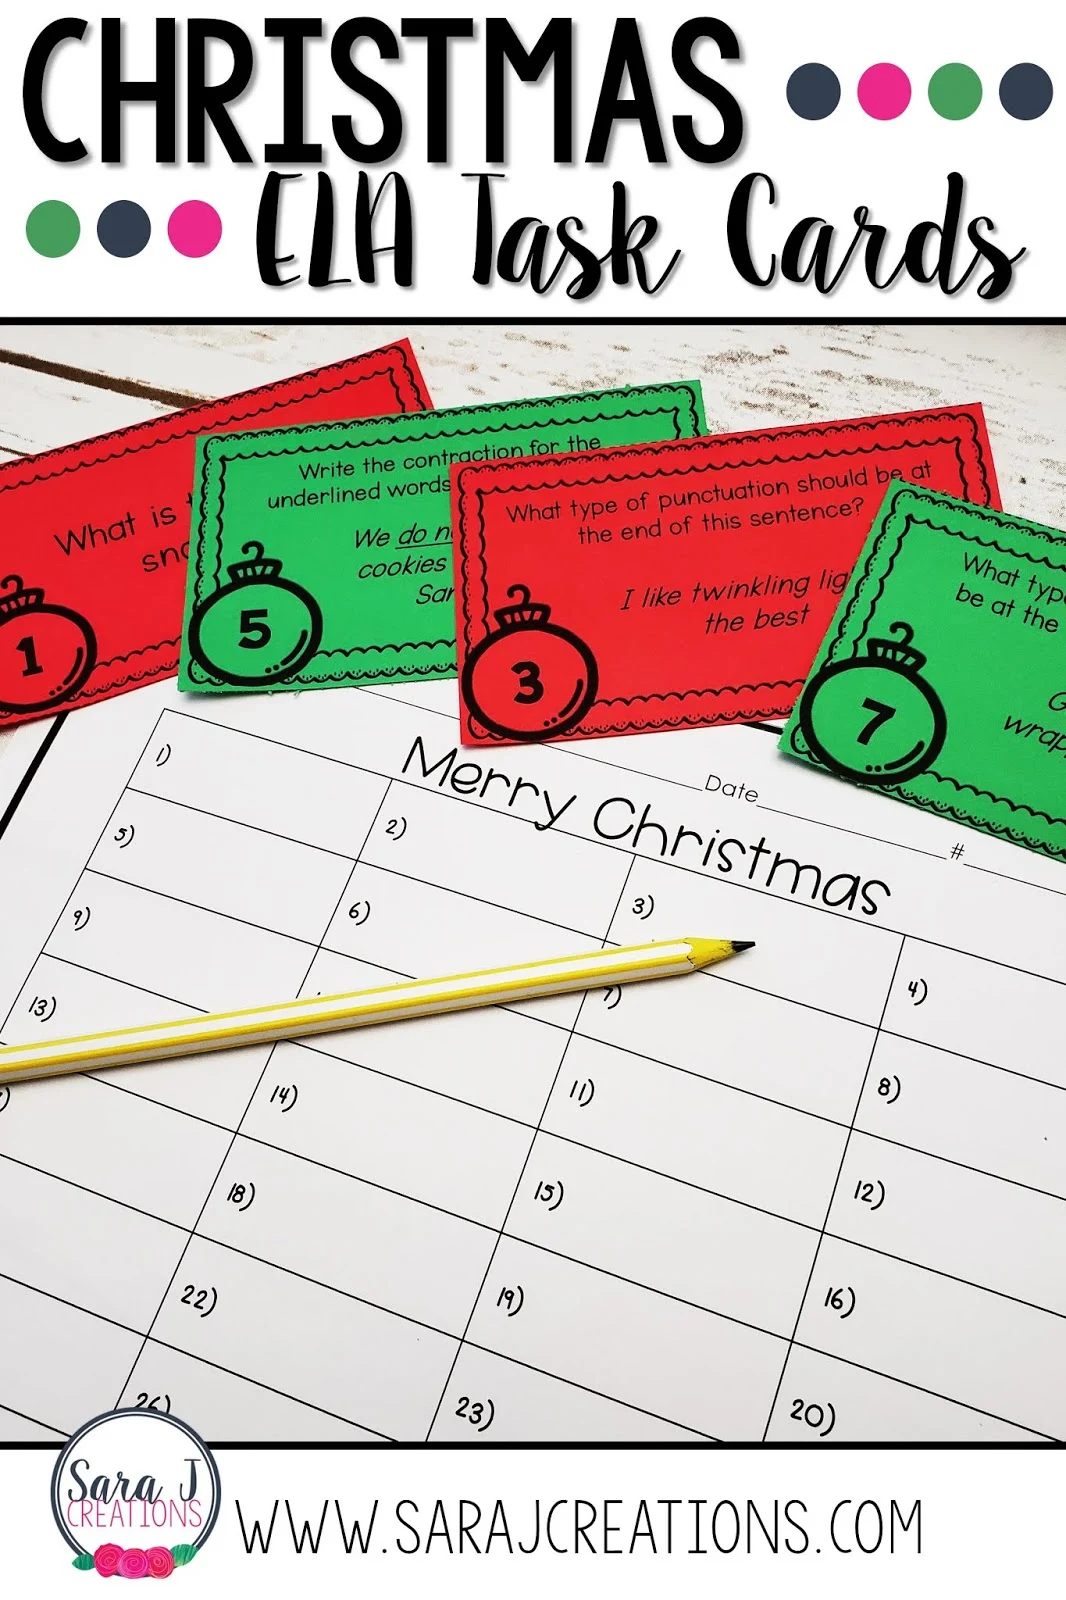 Christmas themed task cards that practice a variety of ELA skills. Review a variety of language arts and literacy topics for second or third grade with these cards. Punctuation, vowels, contractions, parts of speech and more!